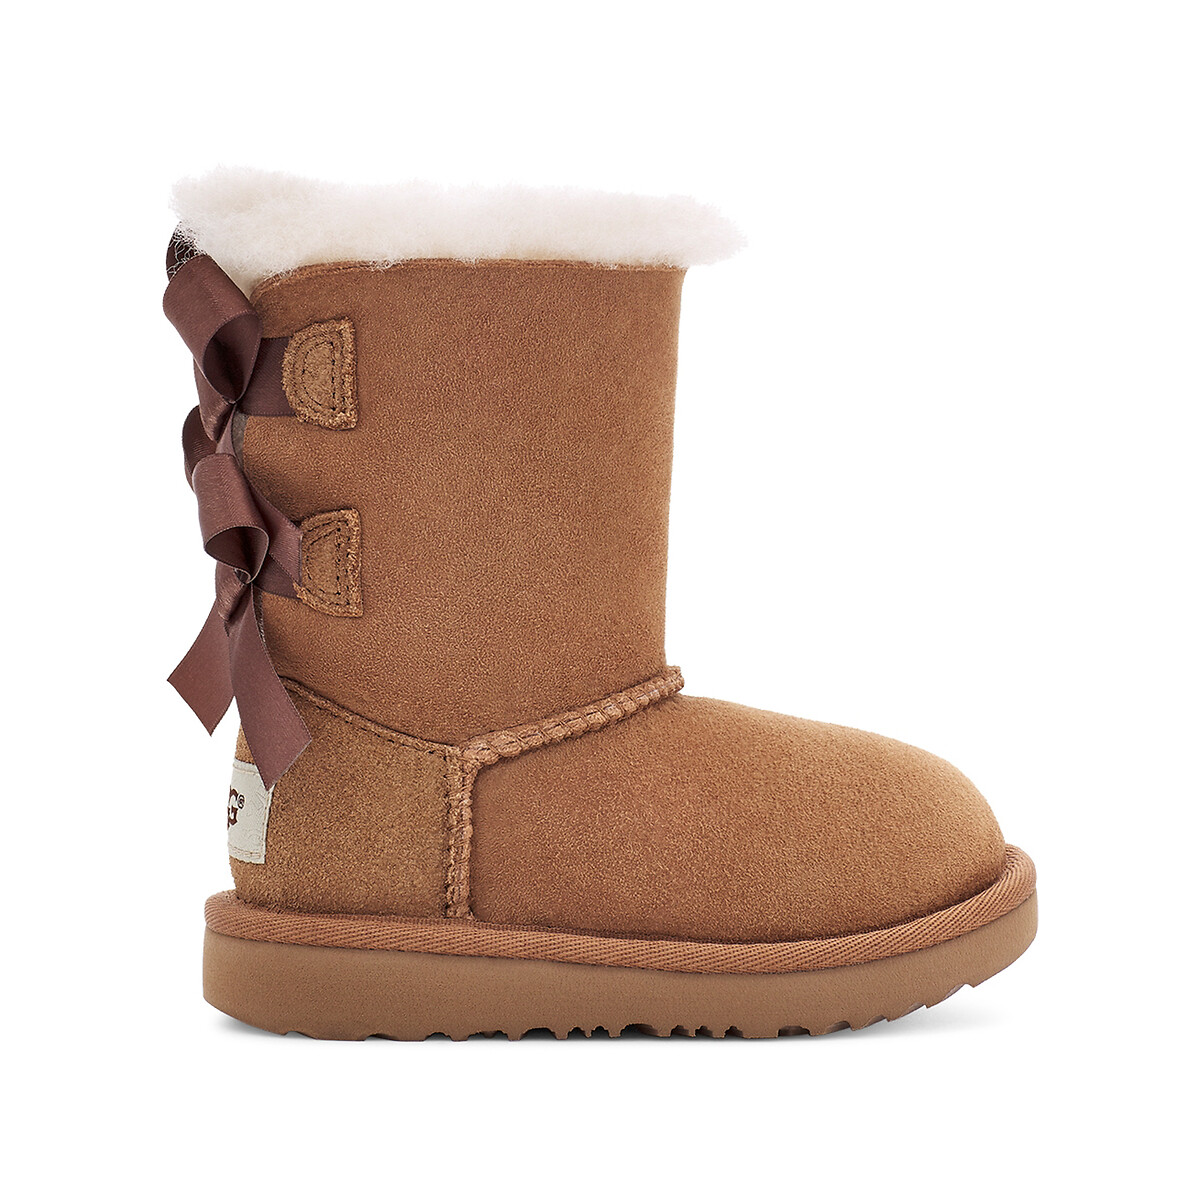 Image of Kids T Bailey Bow II Ankle Boots in Suede with Faux Fur Lining